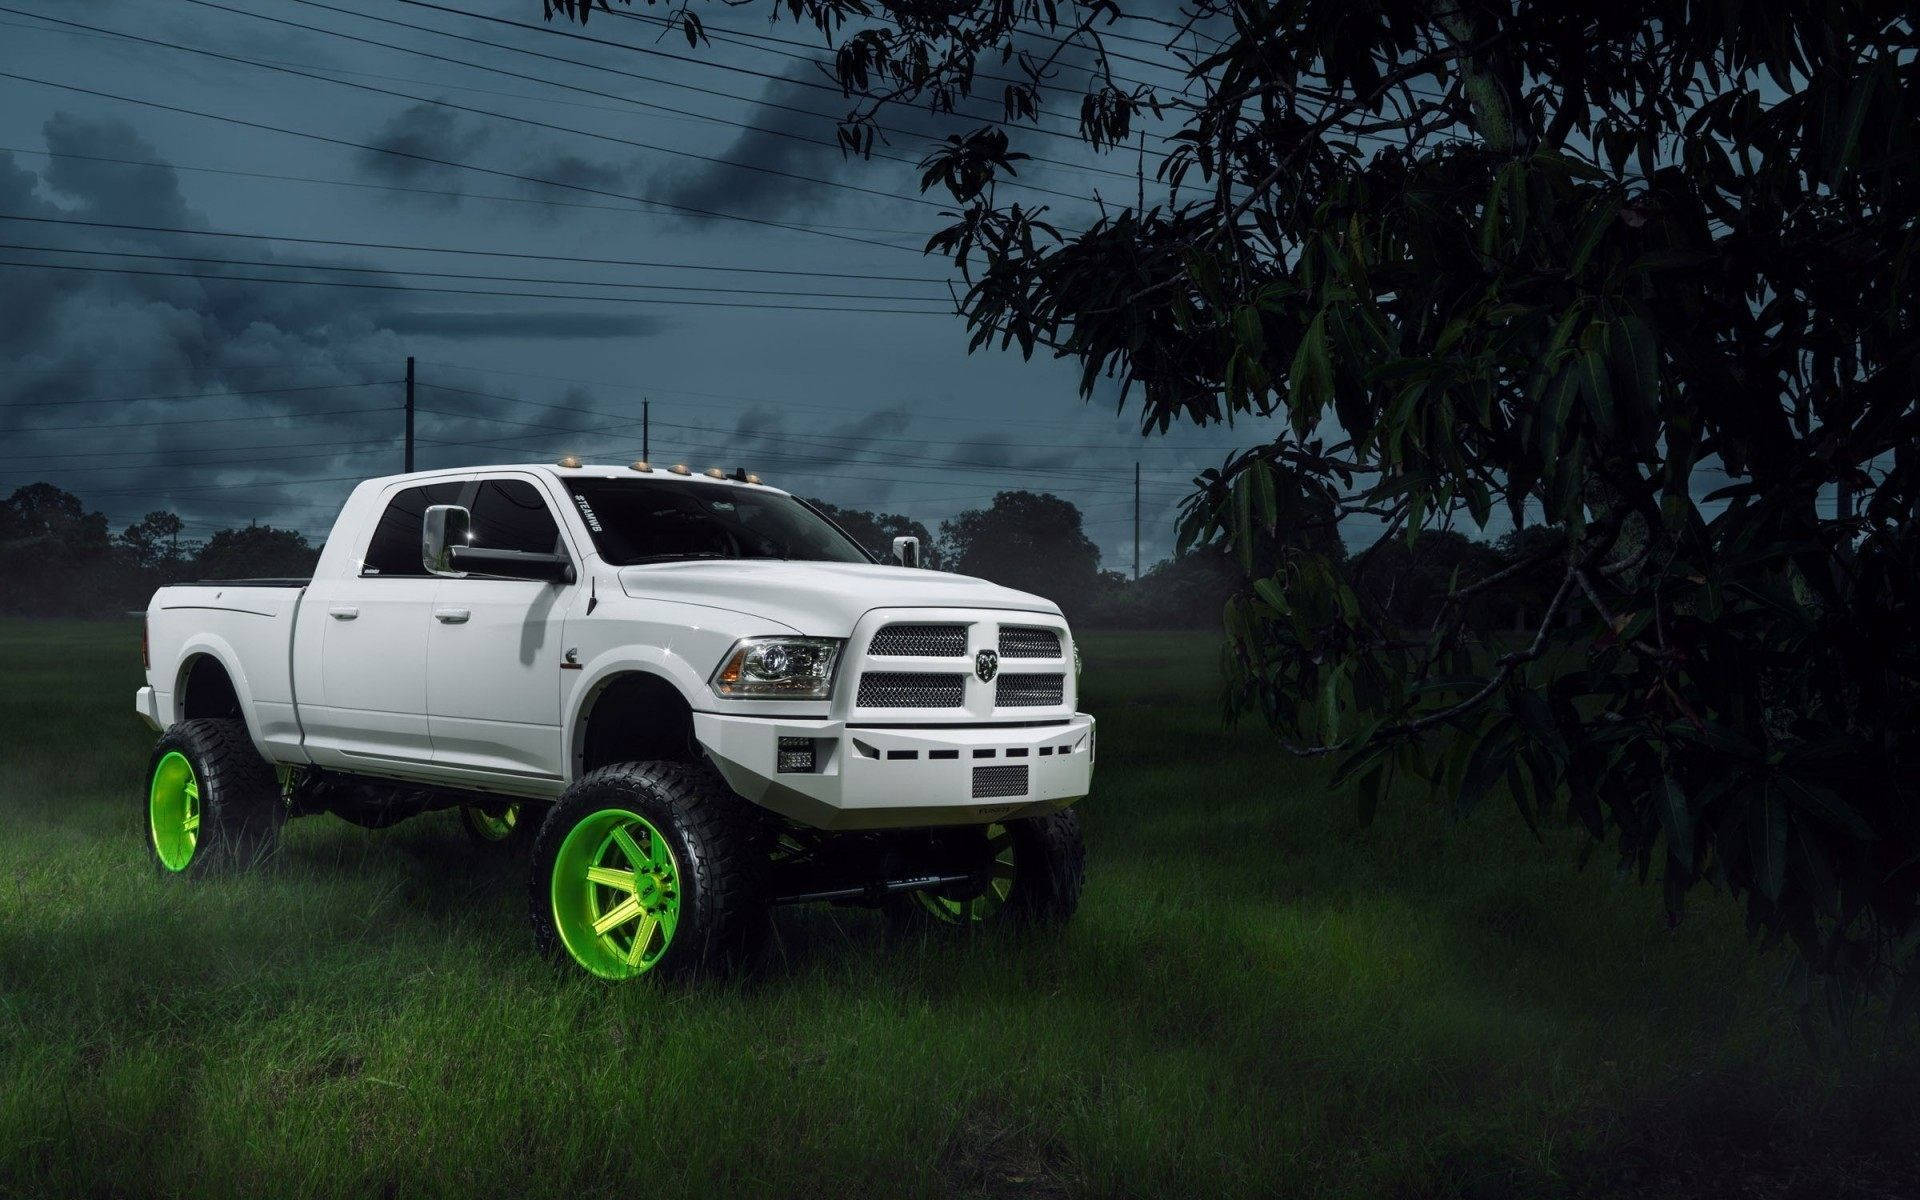 Stunning Green Cool Truck Showcasing Power And Style